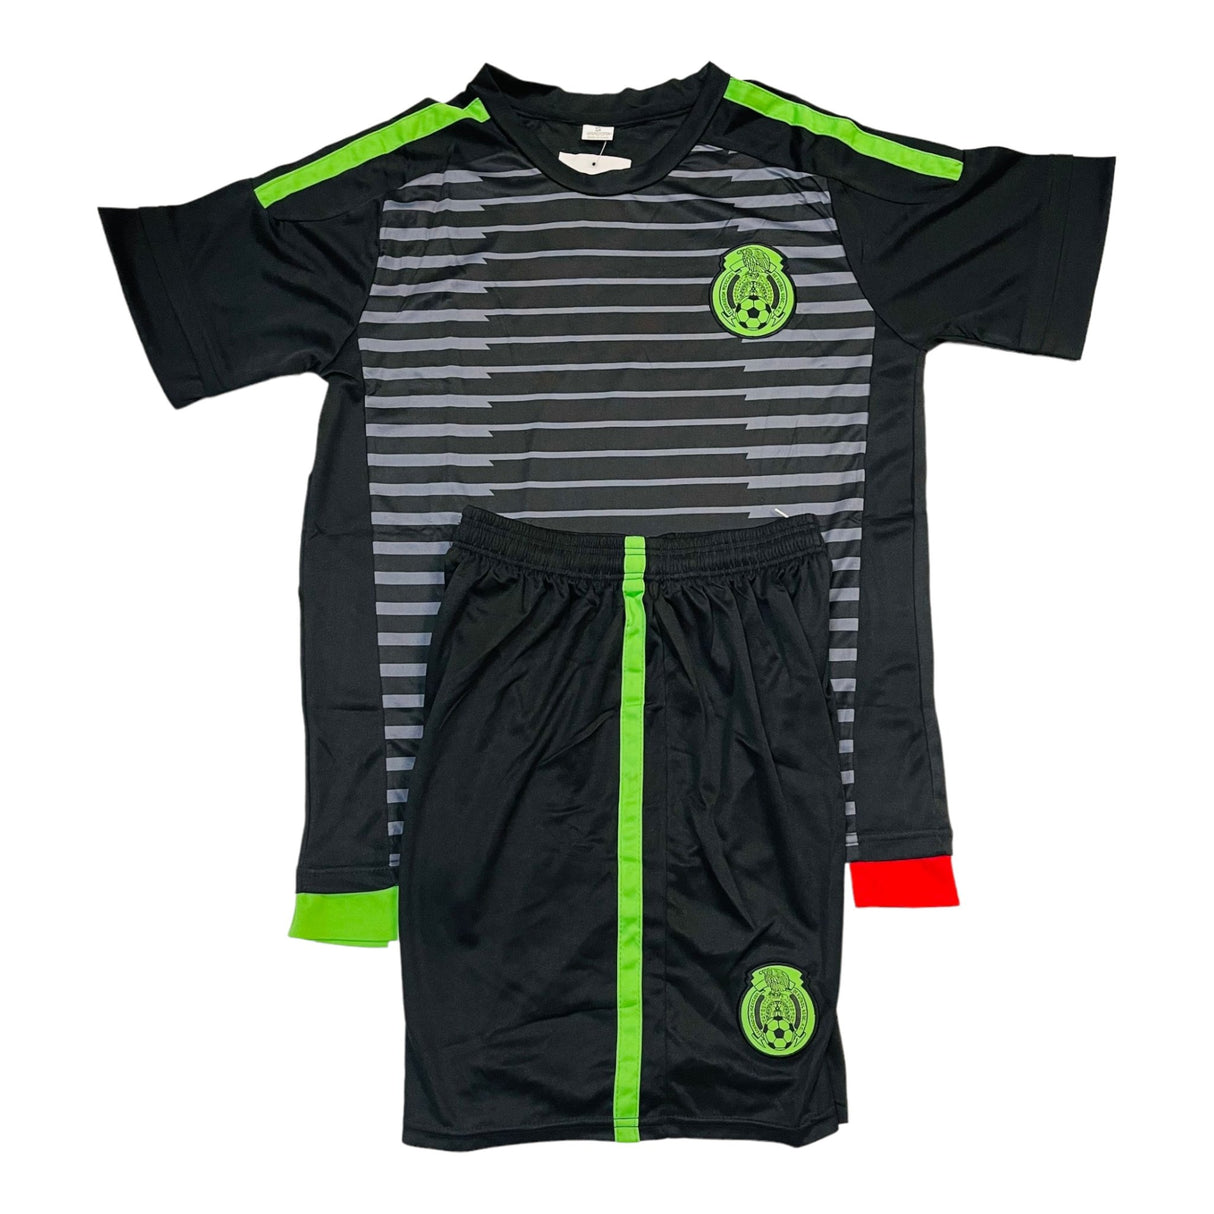 Mexico Sports Jersey For Men's T-Shirts *BLACK-0097* - BELLEZA'S - Mexico Sports Jersey For Men's T-Shirts *BLACK-0097* - JERSEY - 0098